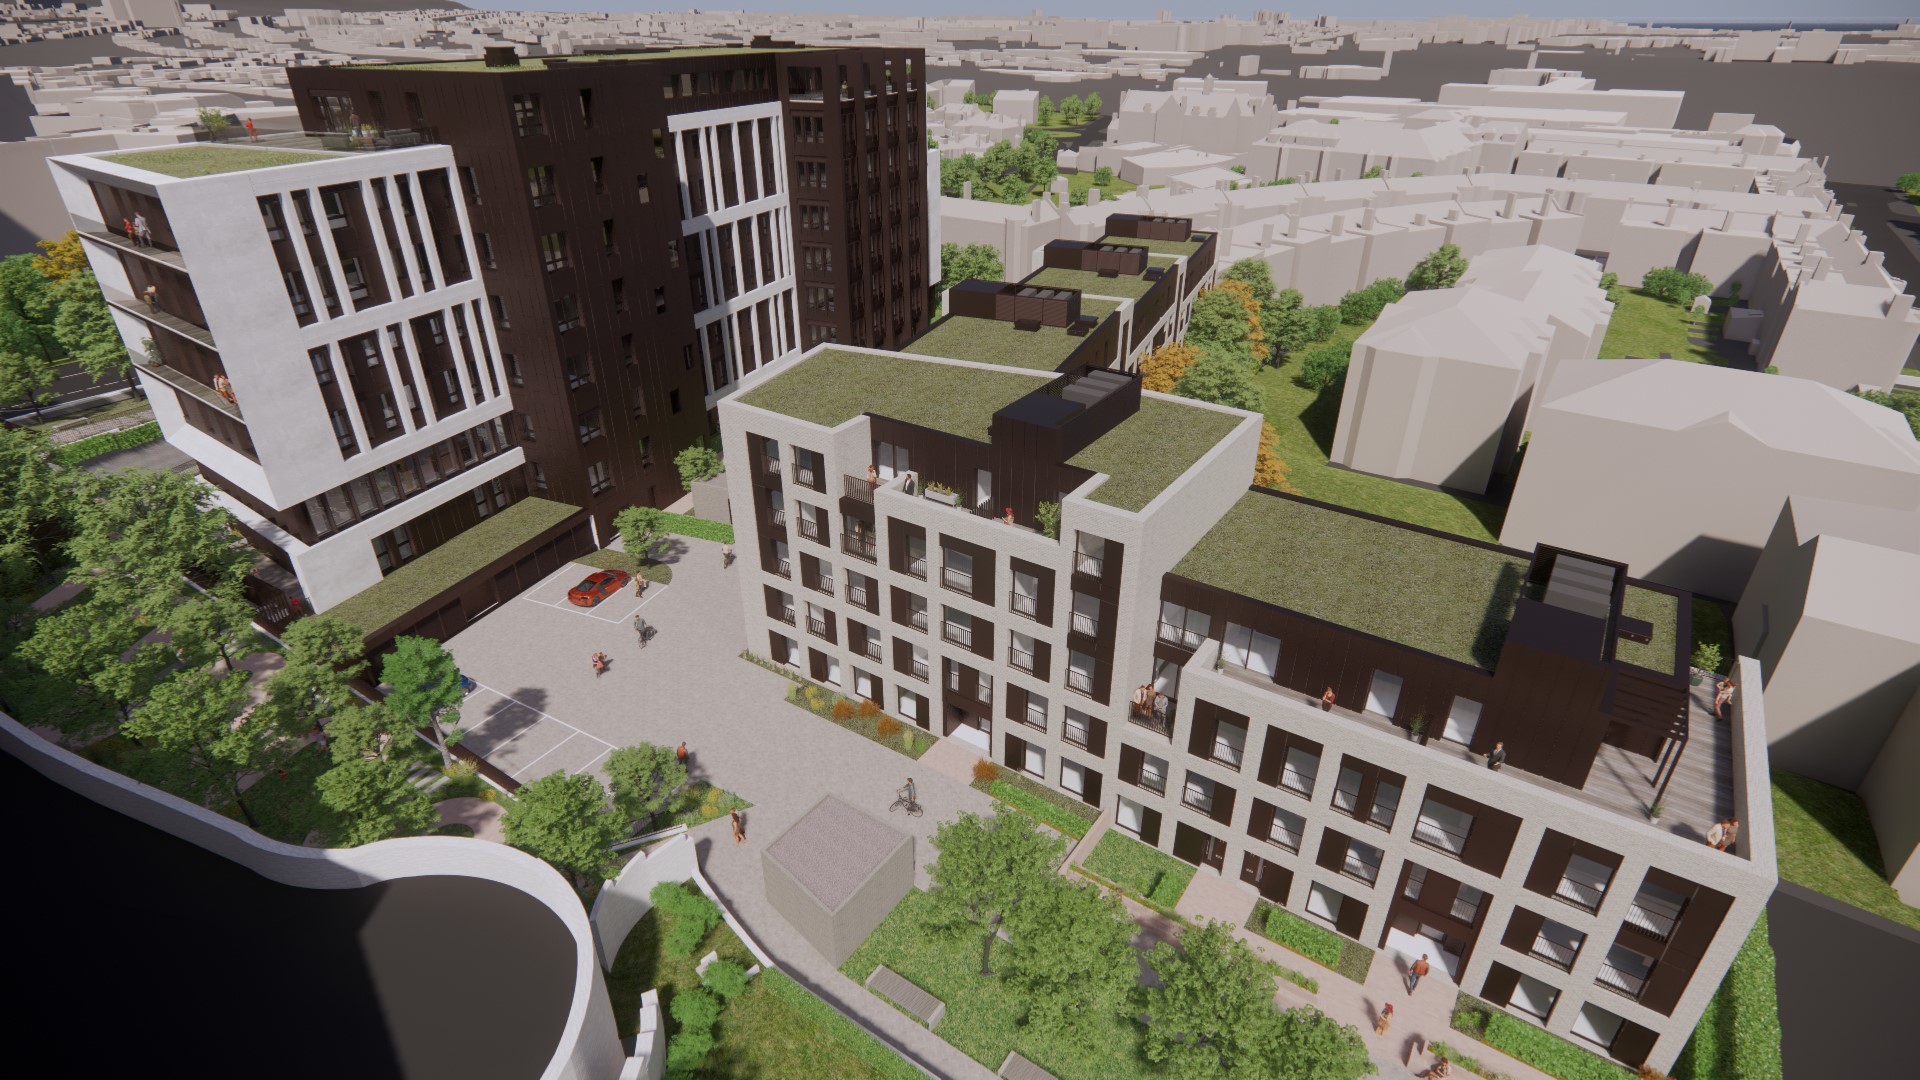 Student accommodation switch proposed for Edinburgh's Finance House